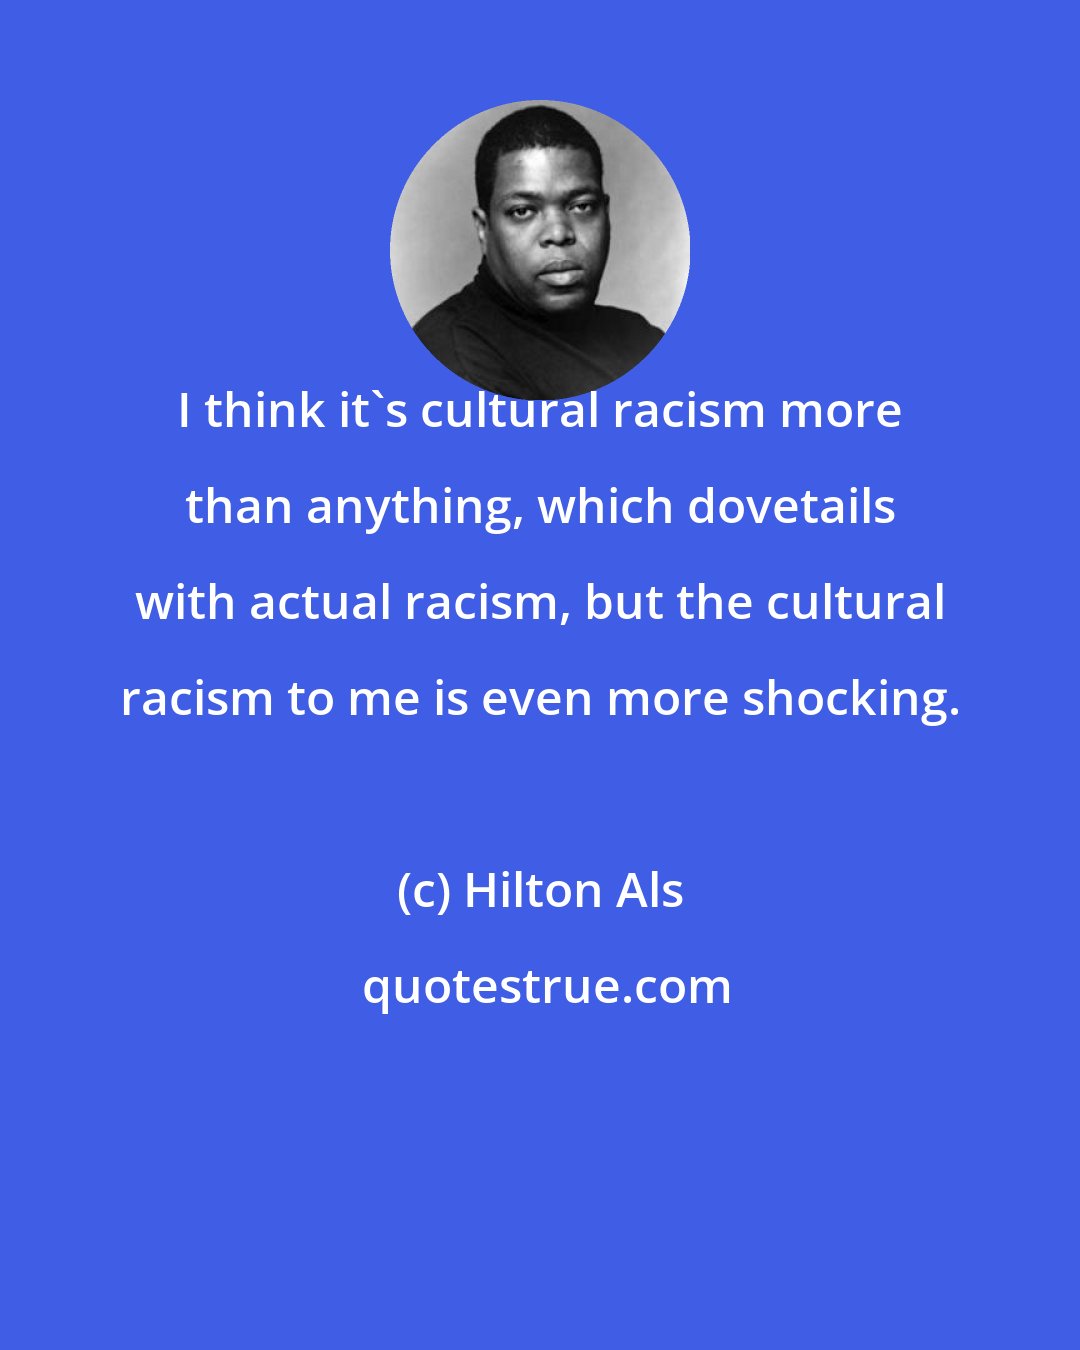 Hilton Als: I think it's cultural racism more than anything, which dovetails with actual racism, but the cultural racism to me is even more shocking.